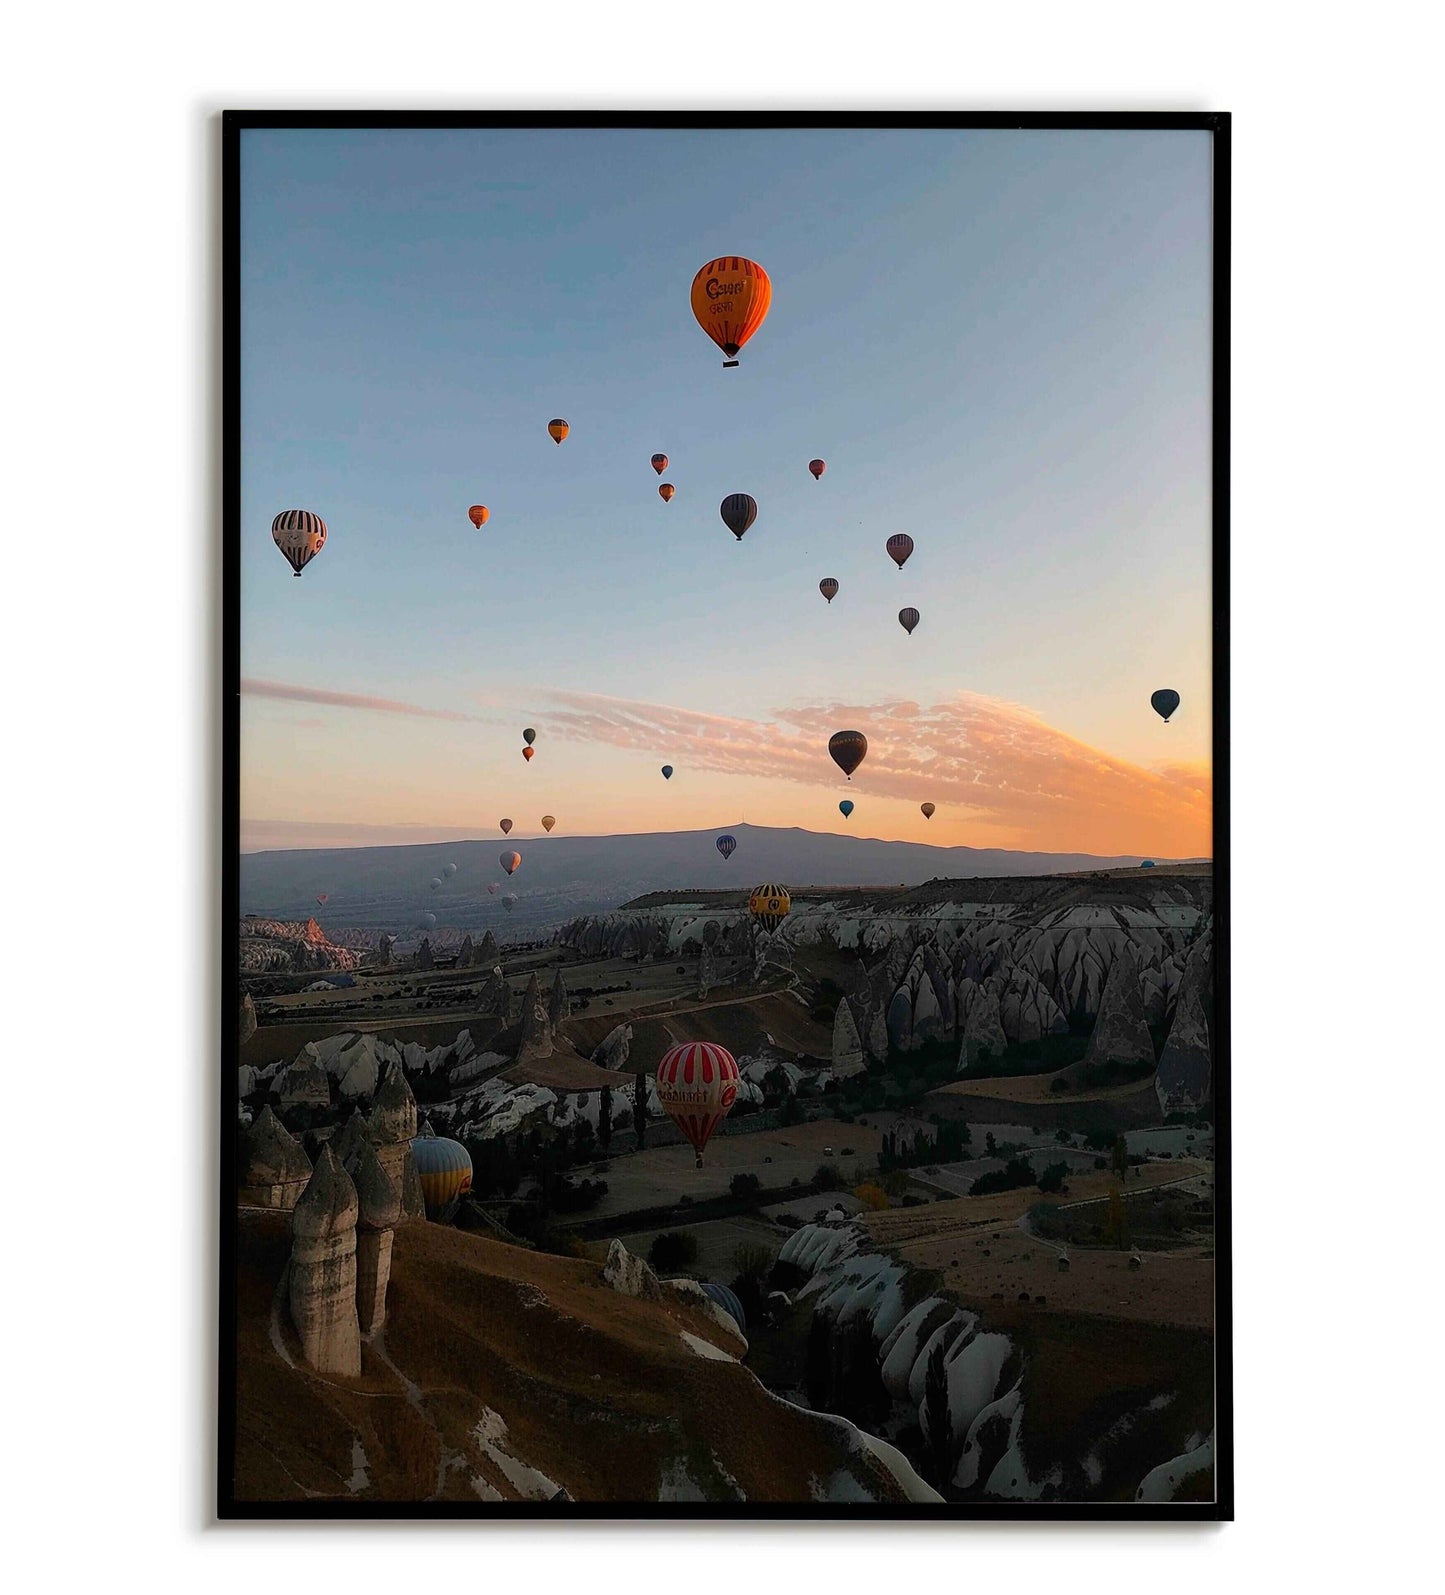 Cappadocia travel printable poster. Available for purchase as a physical poster or digital download